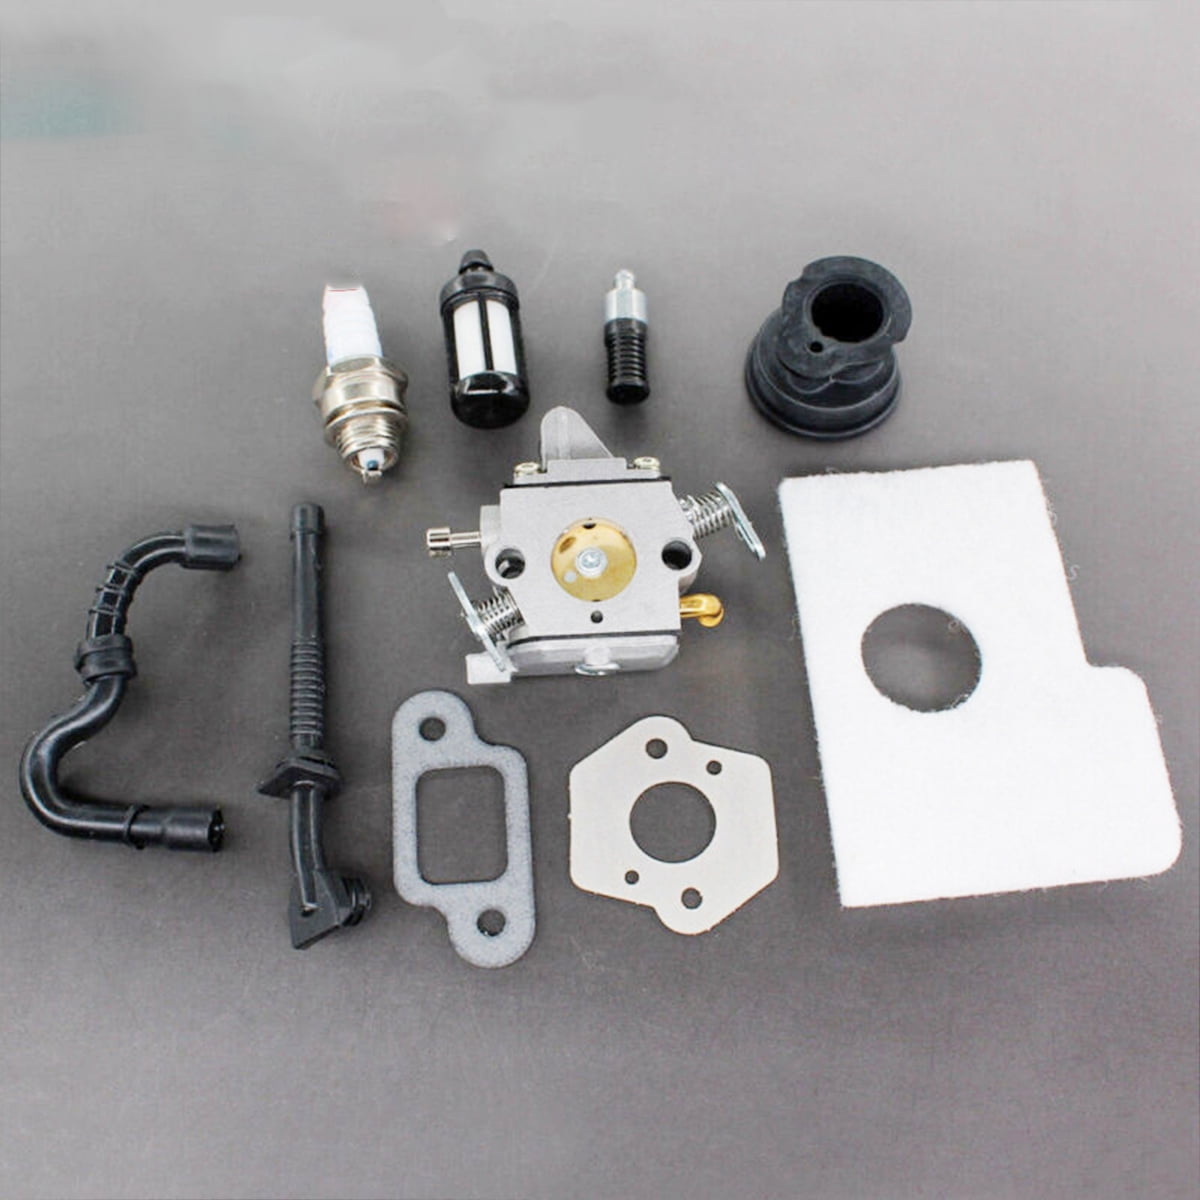 Carb Kit for Stihl MS170 MS180 017 018 Chainsaw Air Filter Fuel Oil Line